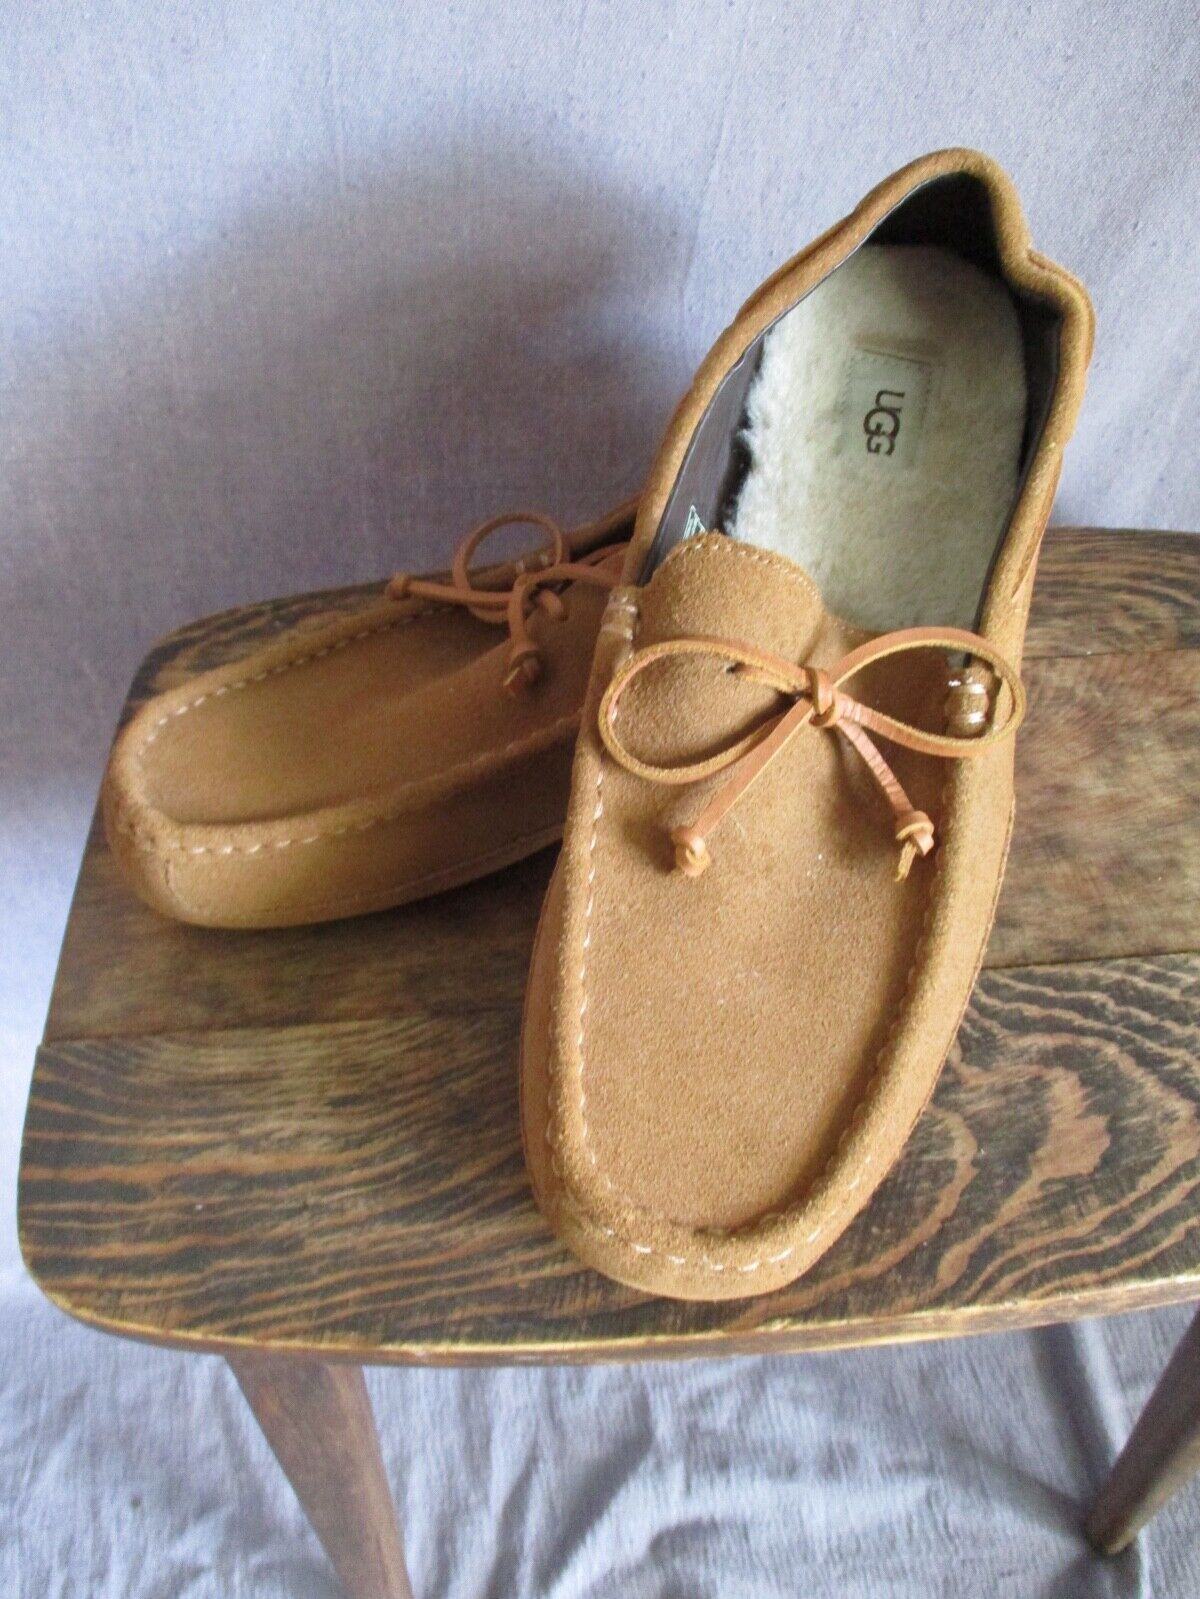 Ugg authentic tan Chestnut brown suede wool insole loafer slippe